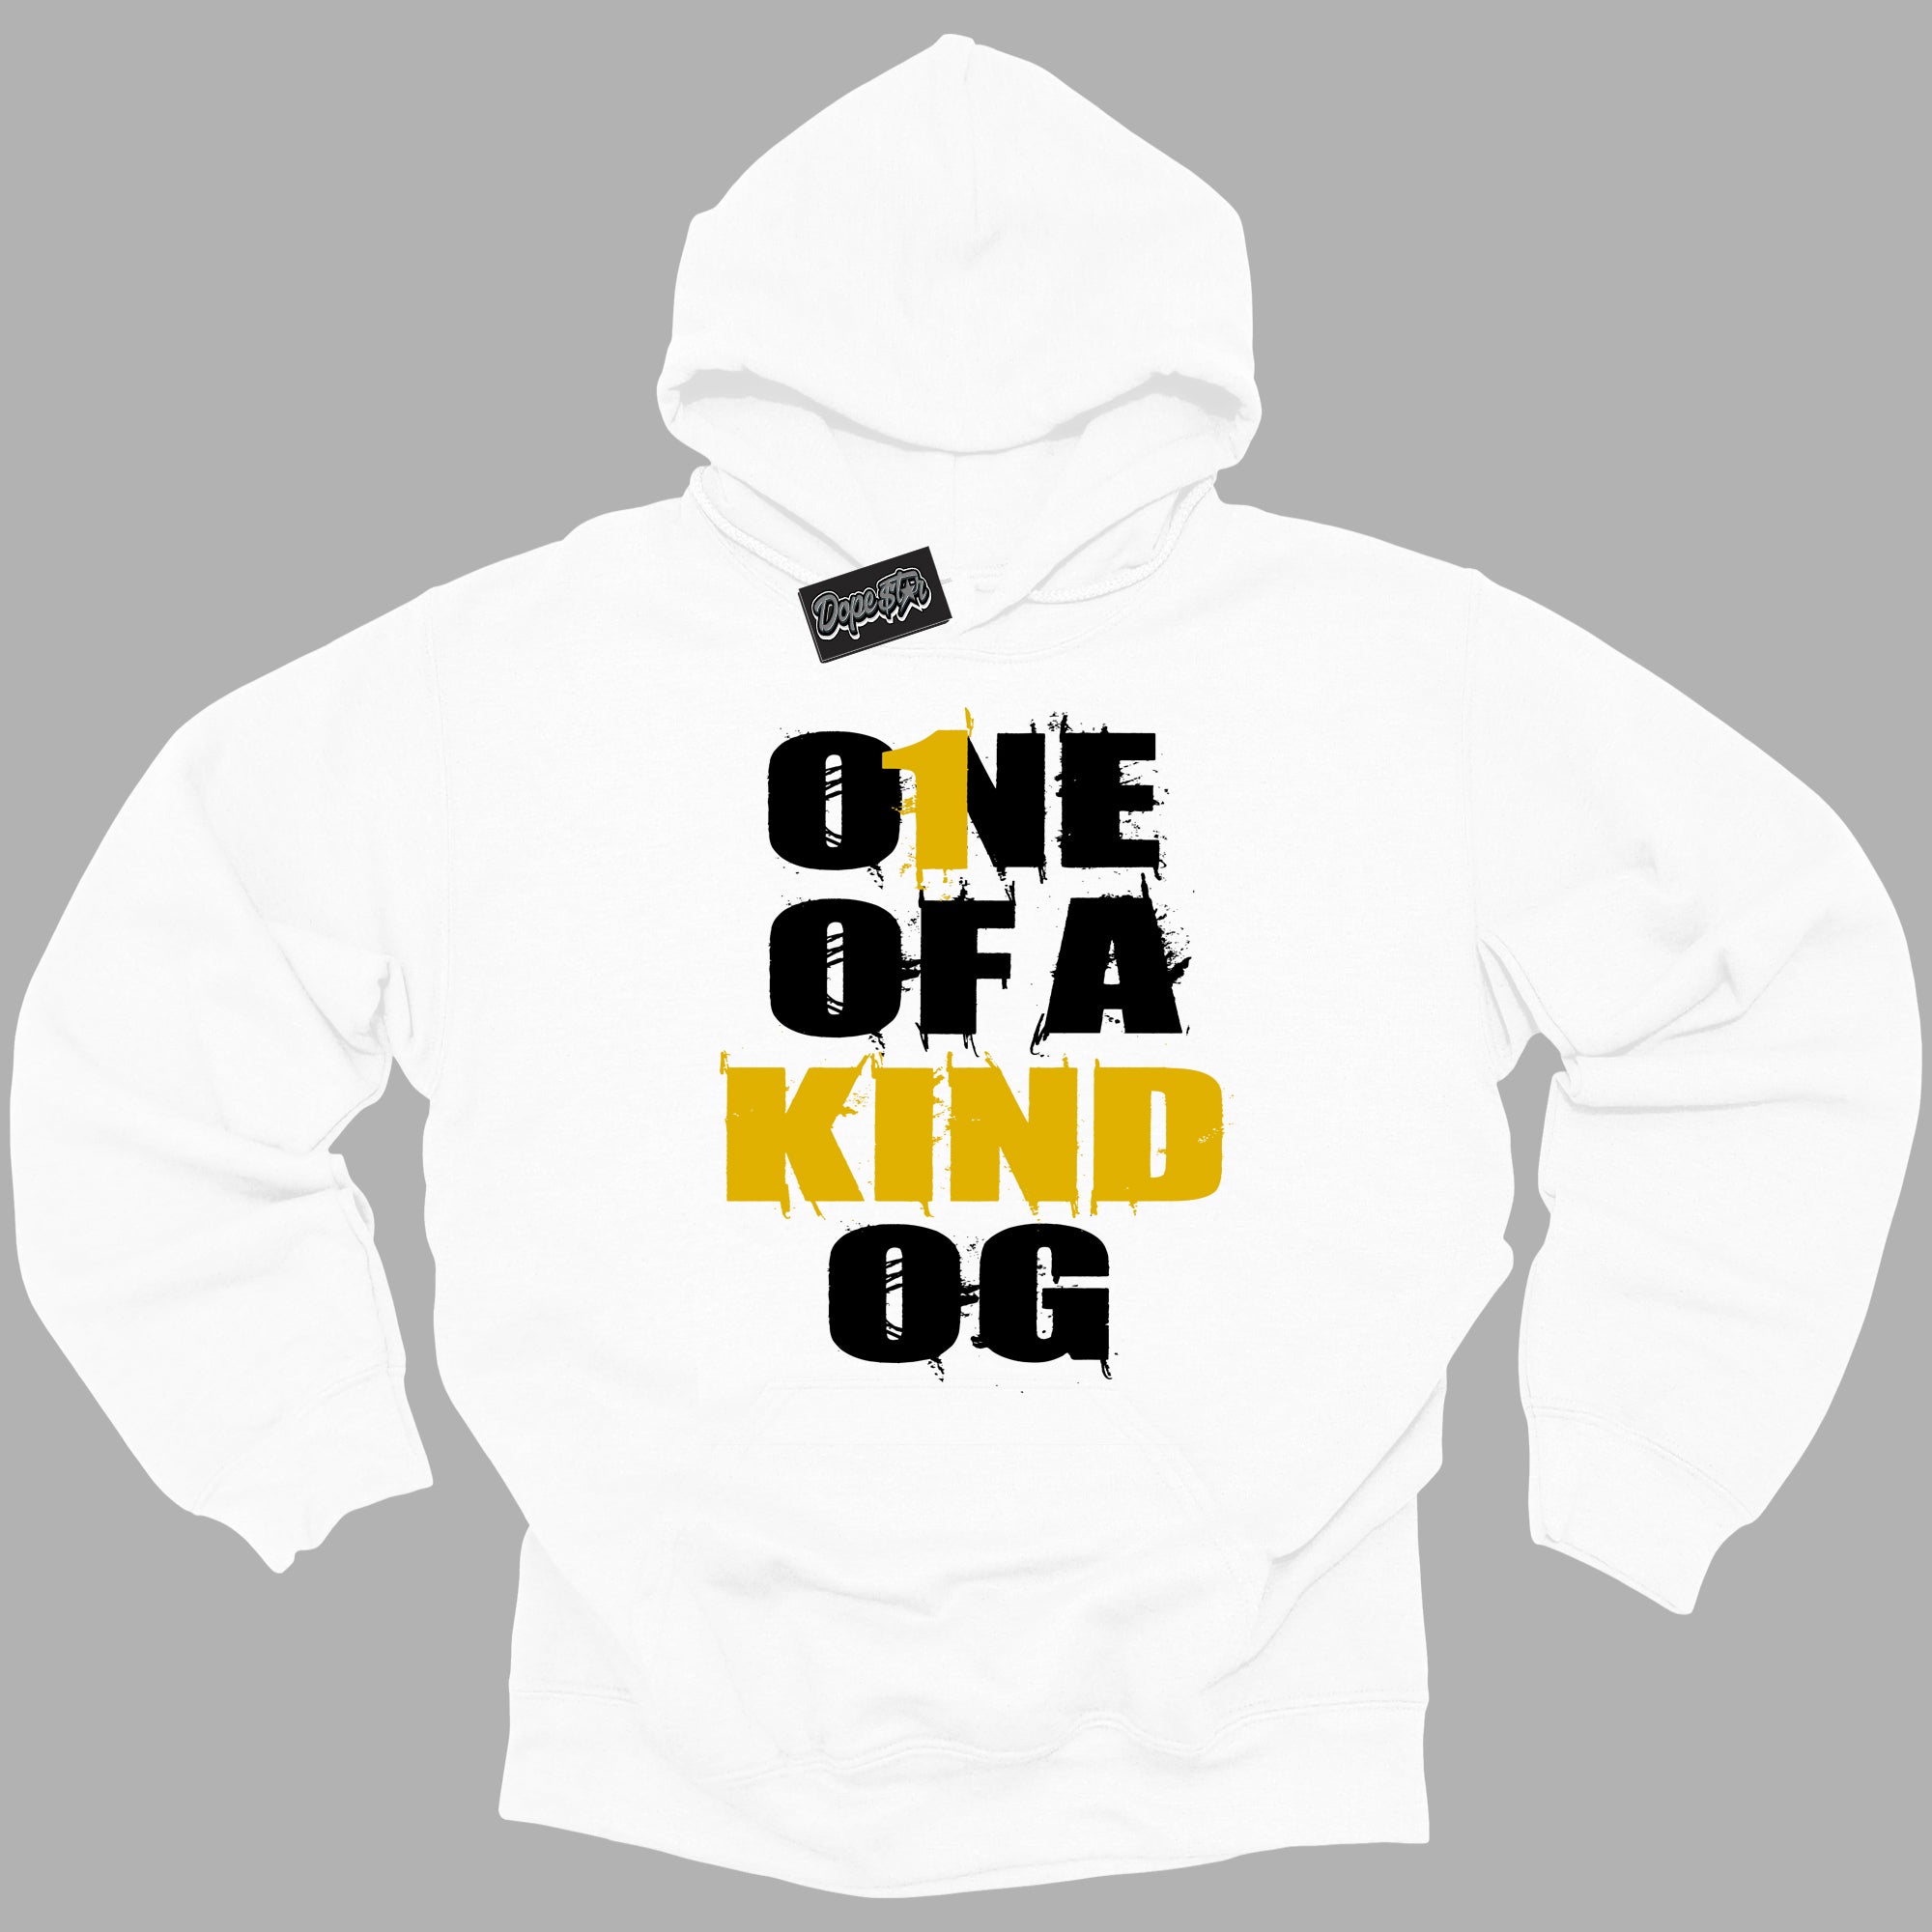 Cool White Hoodie with “One Of A Kind ”  design that Perfectly Matches Yellow Ochre 6s Sneakers.